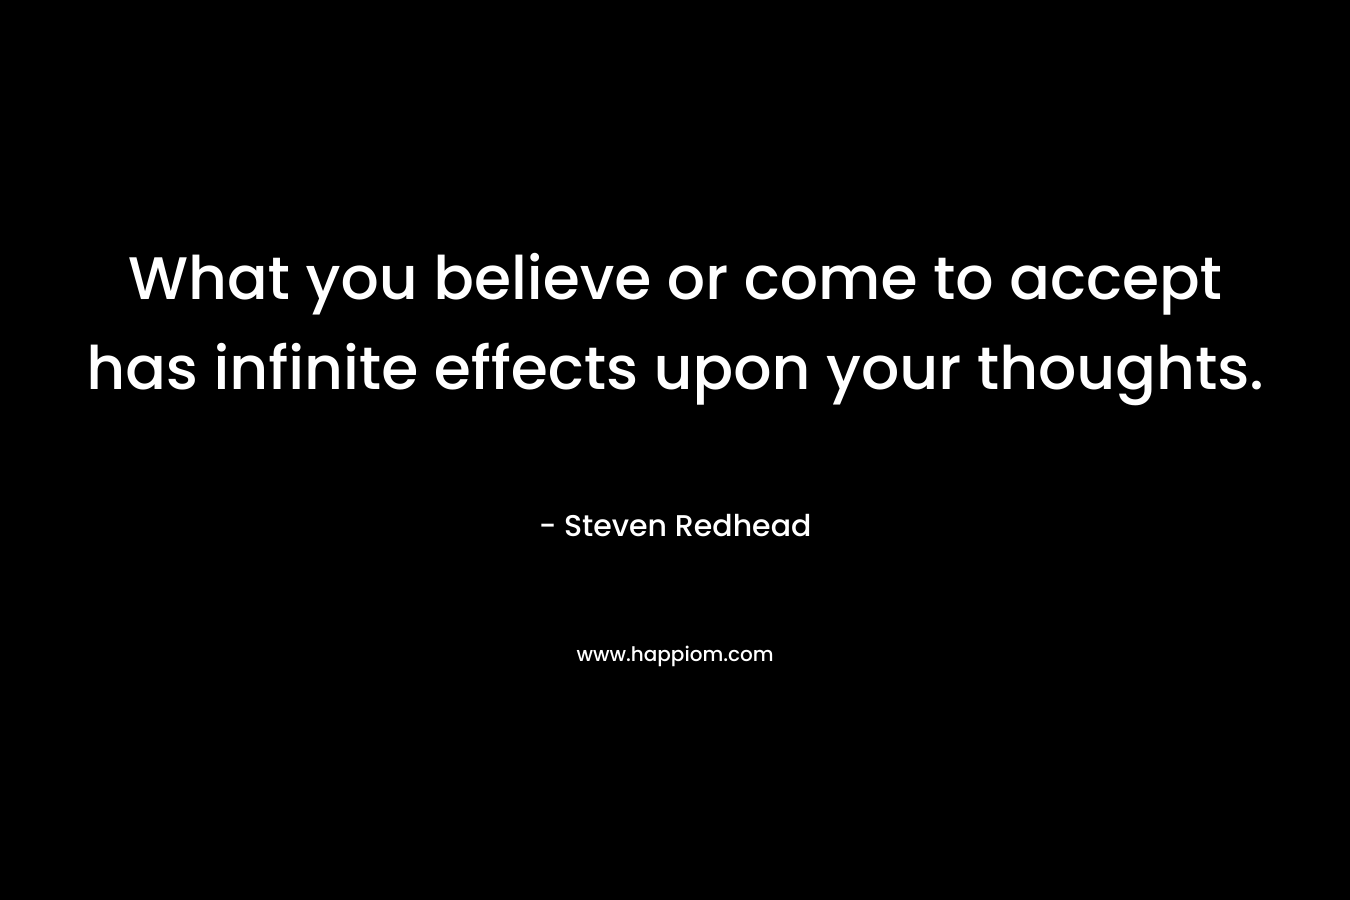 What you believe or come to accept has infinite effects upon your thoughts.